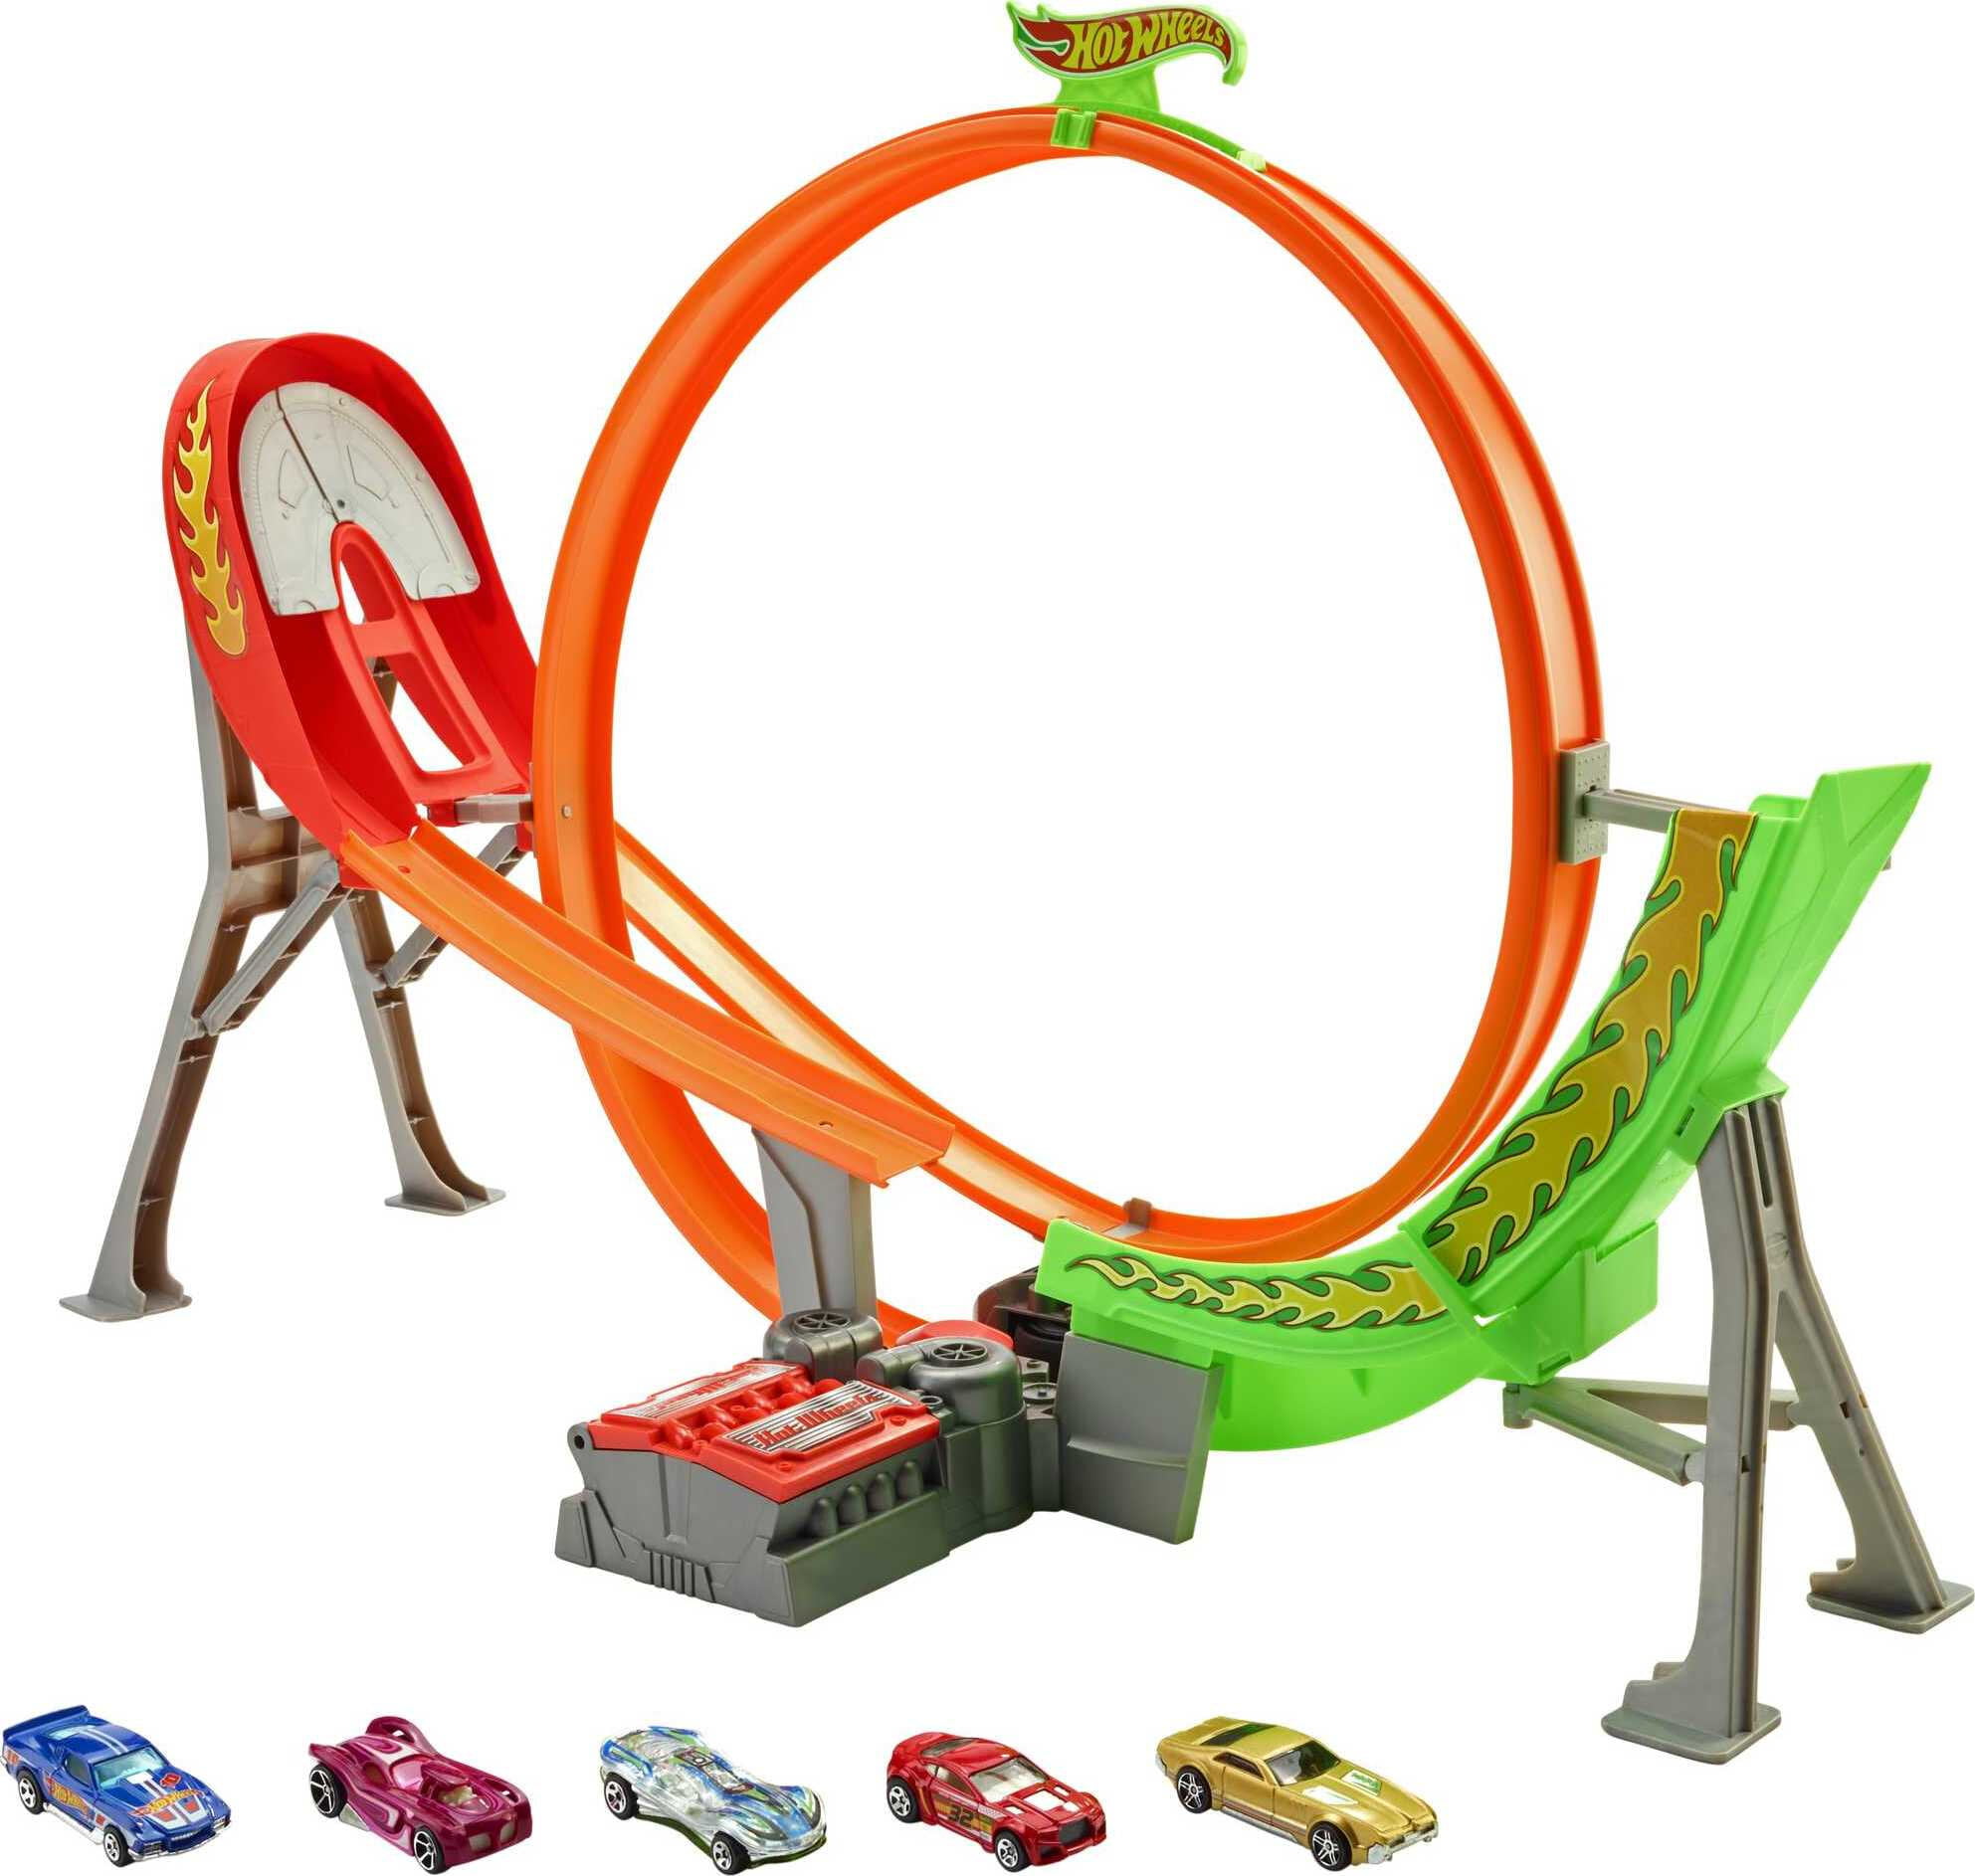 Hot Wheels Corkscrew Race Track Loop Launcher Kids Toys Matchbox Cars Top Play for sale online 